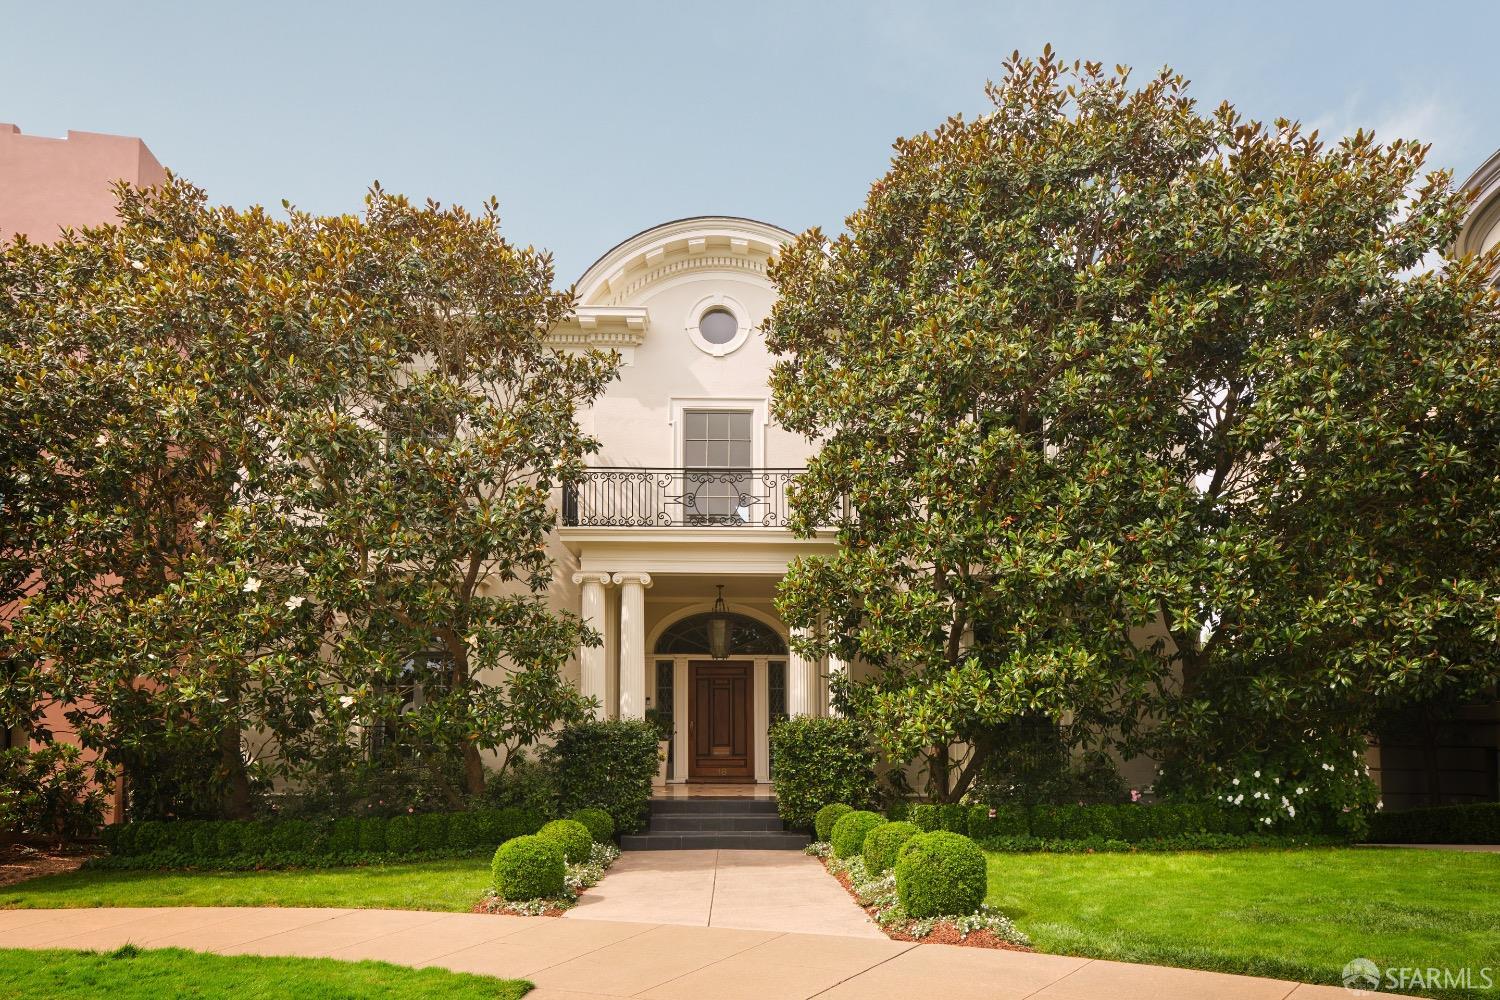 This dignified seven-bedroom residence stands stalwart on Presidio Terrace. Combining a chic contemporary aesthetic with classical style, it is filled with light and impressive in scale. Just inside are a handsome library, the formal living room, which features a central fireplace and French windows and doors, and the dining room that boasts a bay window admitting incredible natural light. Adjoining is a bright, open kitchen with an island, a Viking gas range, and walk-in pantries; and a breakfast bar that opens to an inviting family room with doors to a sun-washed terrace. One level above, the principal suite overlooks the gardens below and enjoys three closets, and a bath with a soaking tub and a shower. Three additional bedrooms each with ample closets complete the bedroom level. A gym, home office, guest suite, and a skylit family room occupy the top level. On the lower level, a private guest bedroom has multiple windows offering a flower-filled view of the backyard. Joining it are a media room, a wine cellar and tasting area, a laundry room, a full bath, and a generous oversized multi-car garage. An elevator connects three levels of the home. The vibrant backyard includes a lush expanse of lawn and a tranquil Japanese-inspired koi pond.